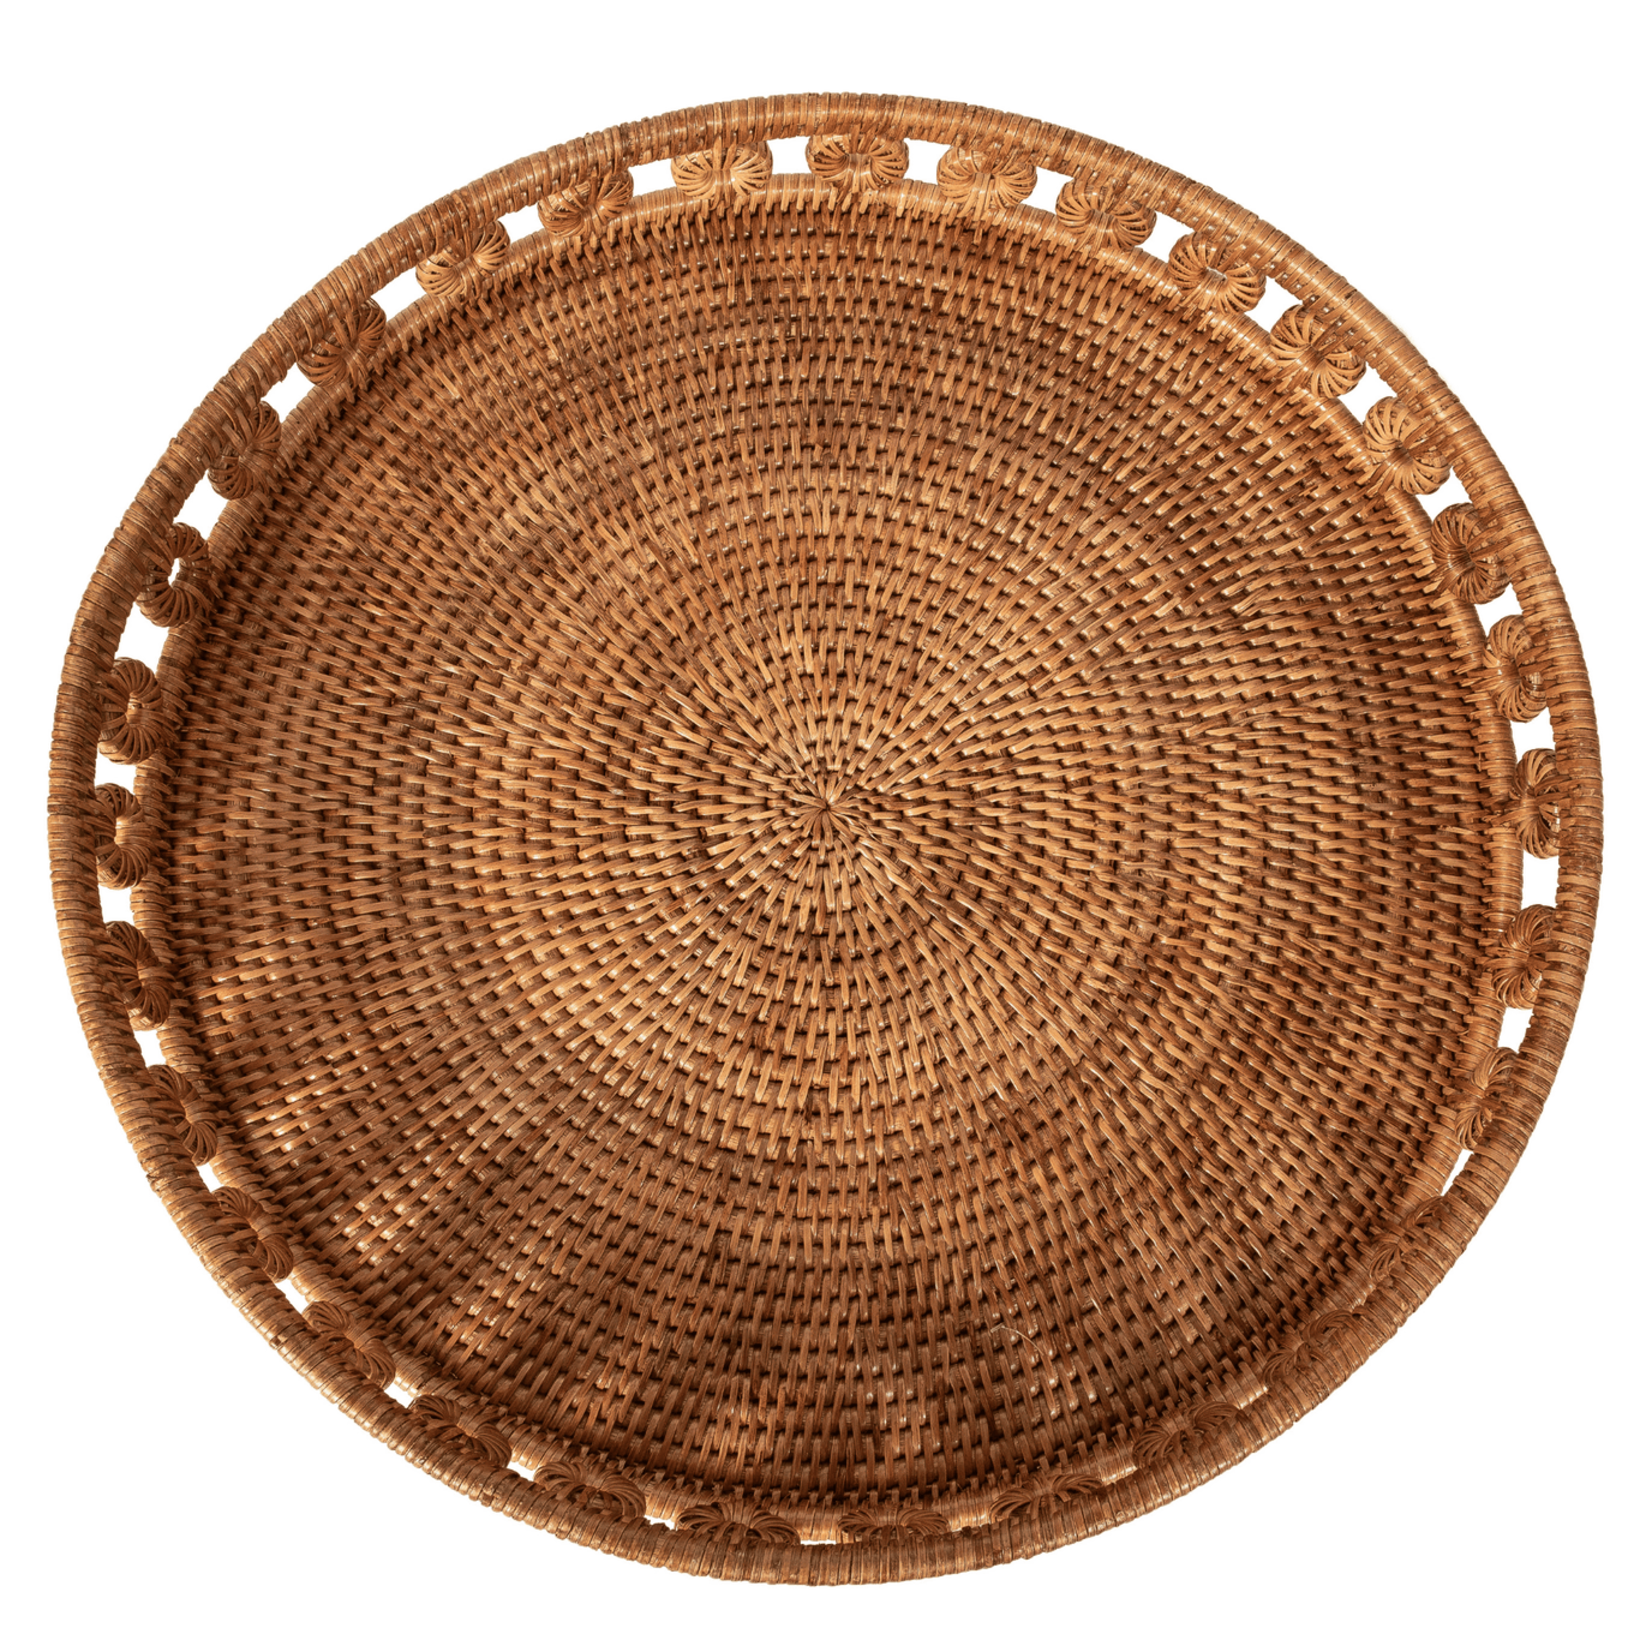 Artifacts Trading Company Rattan Design Round Trays with Glass Insert